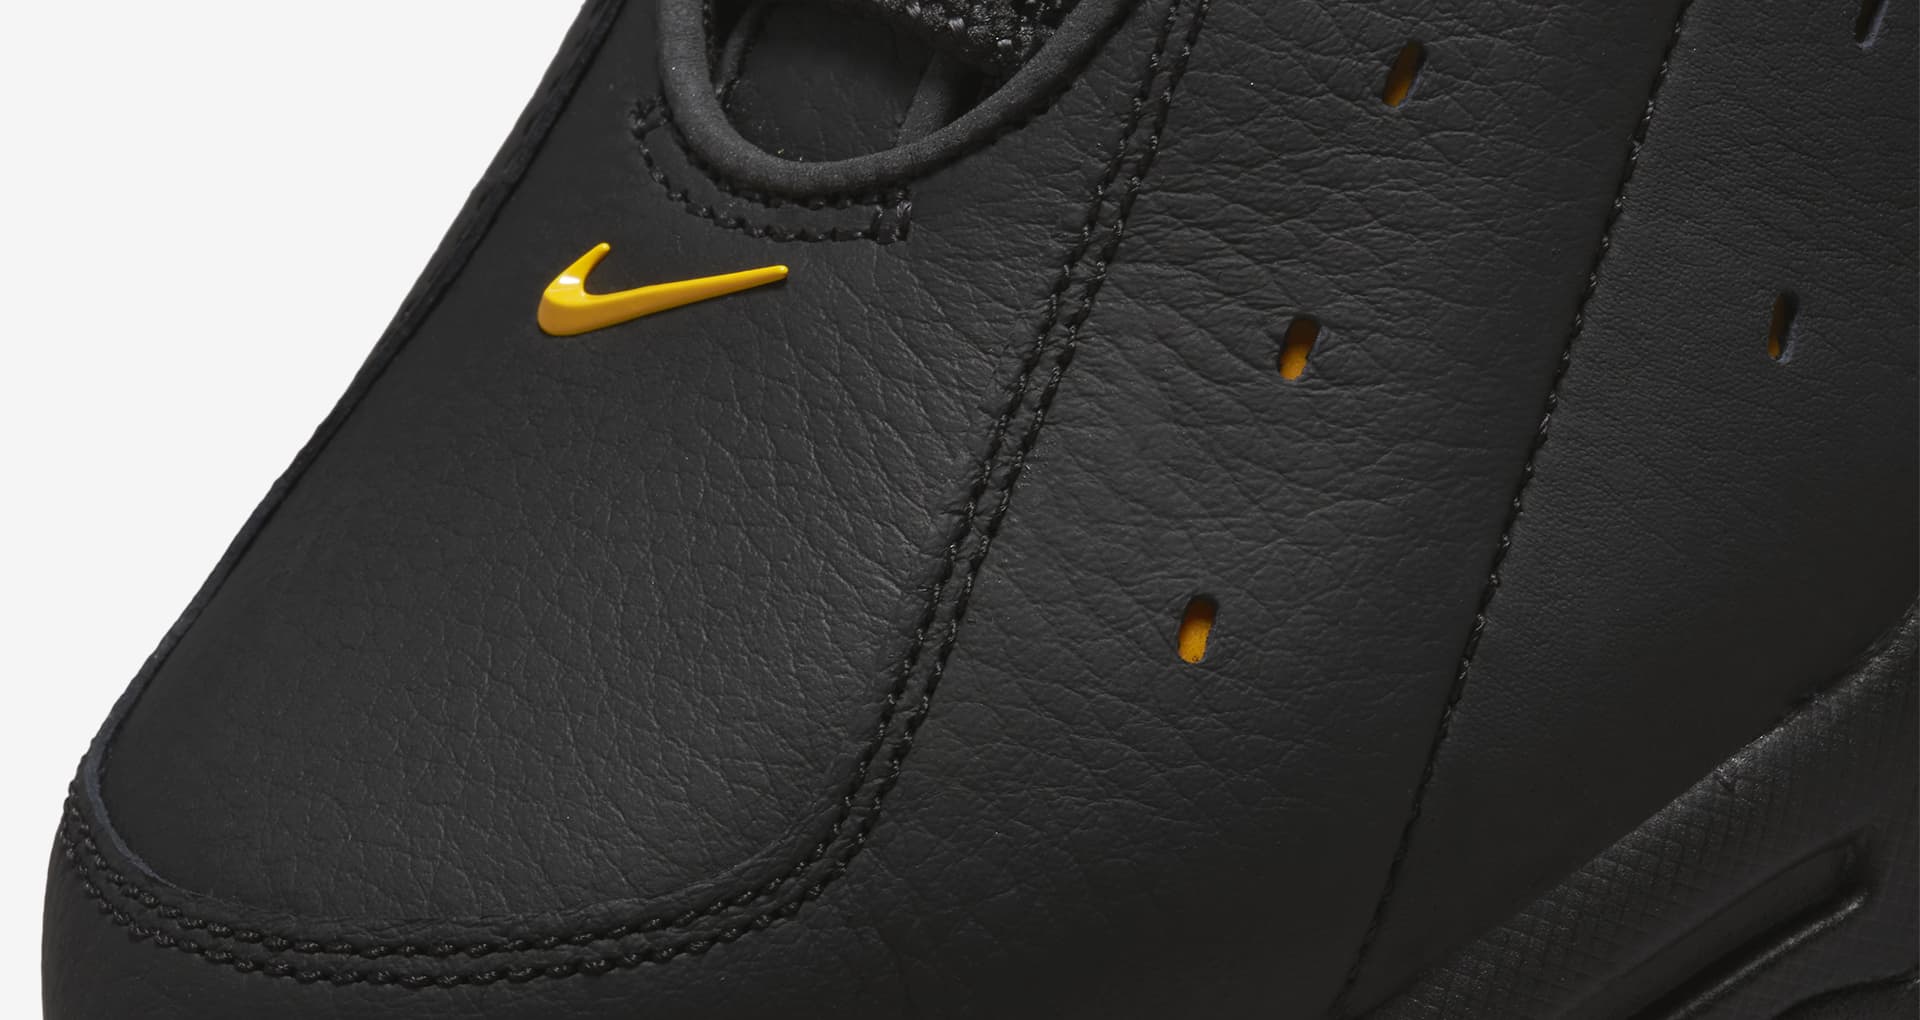 NOCTA Hot Step 'Black and Gold' (DH4692-002) Release Date. Nike SNKRS LU